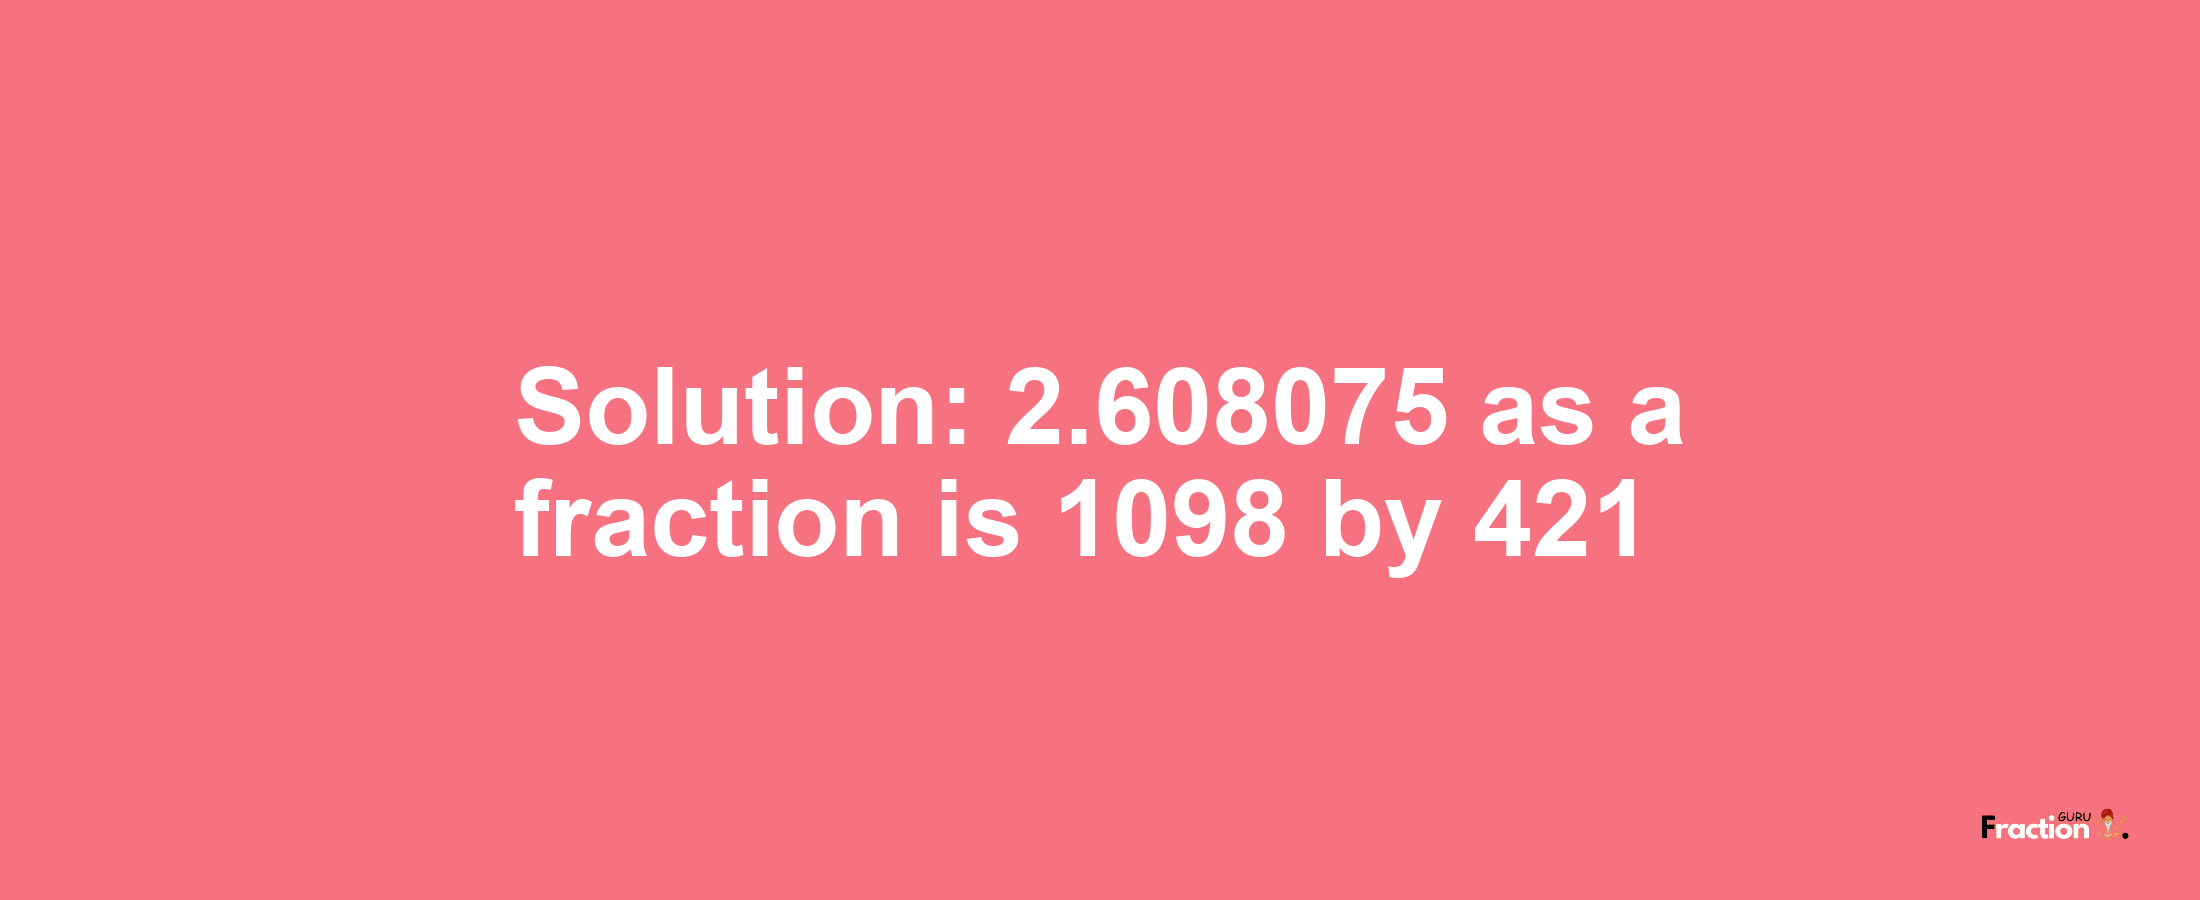 Solution:2.608075 as a fraction is 1098/421